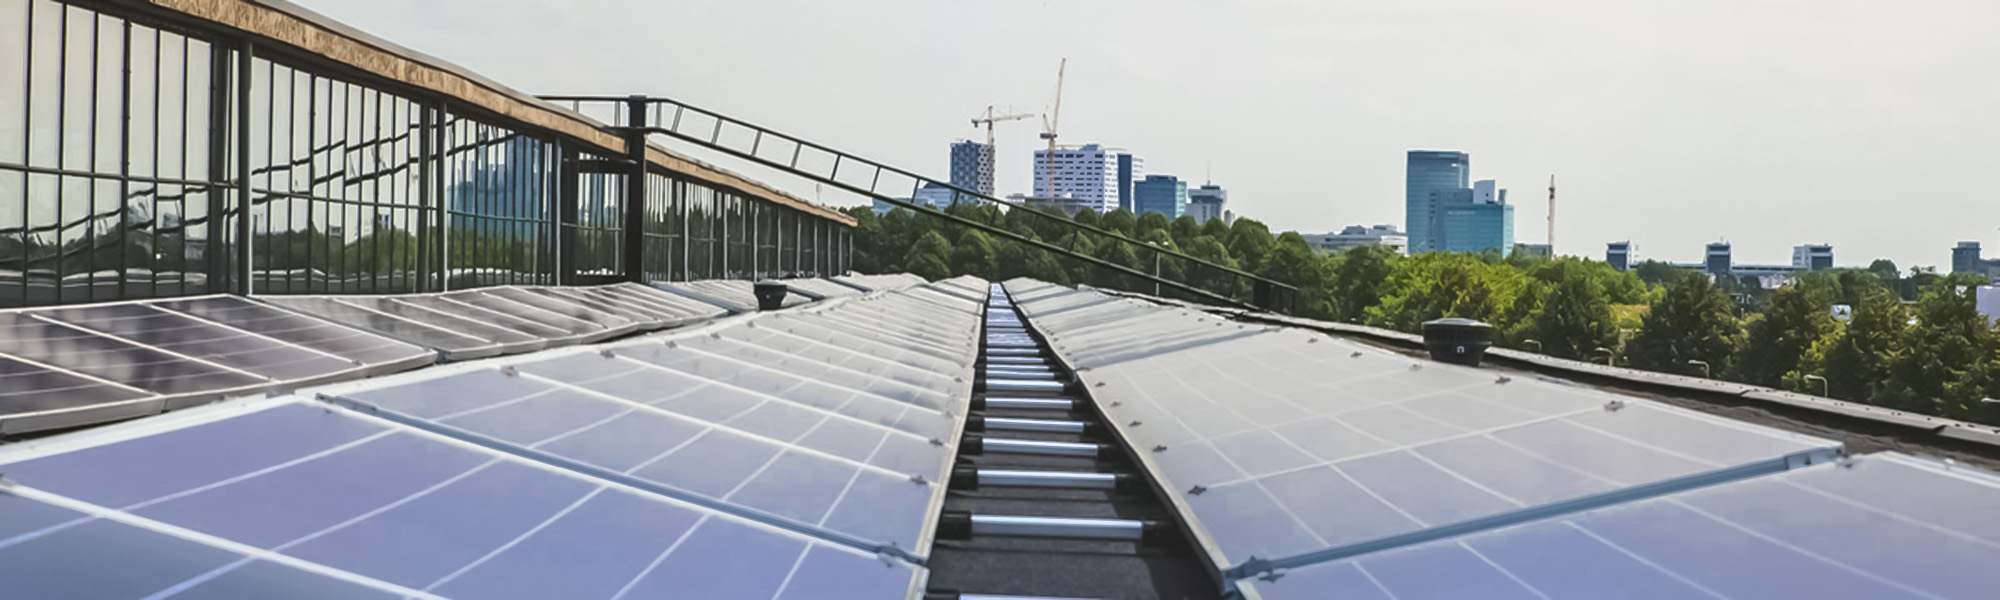 Solar panels stretch into the horizon of green trees and a cityscape.